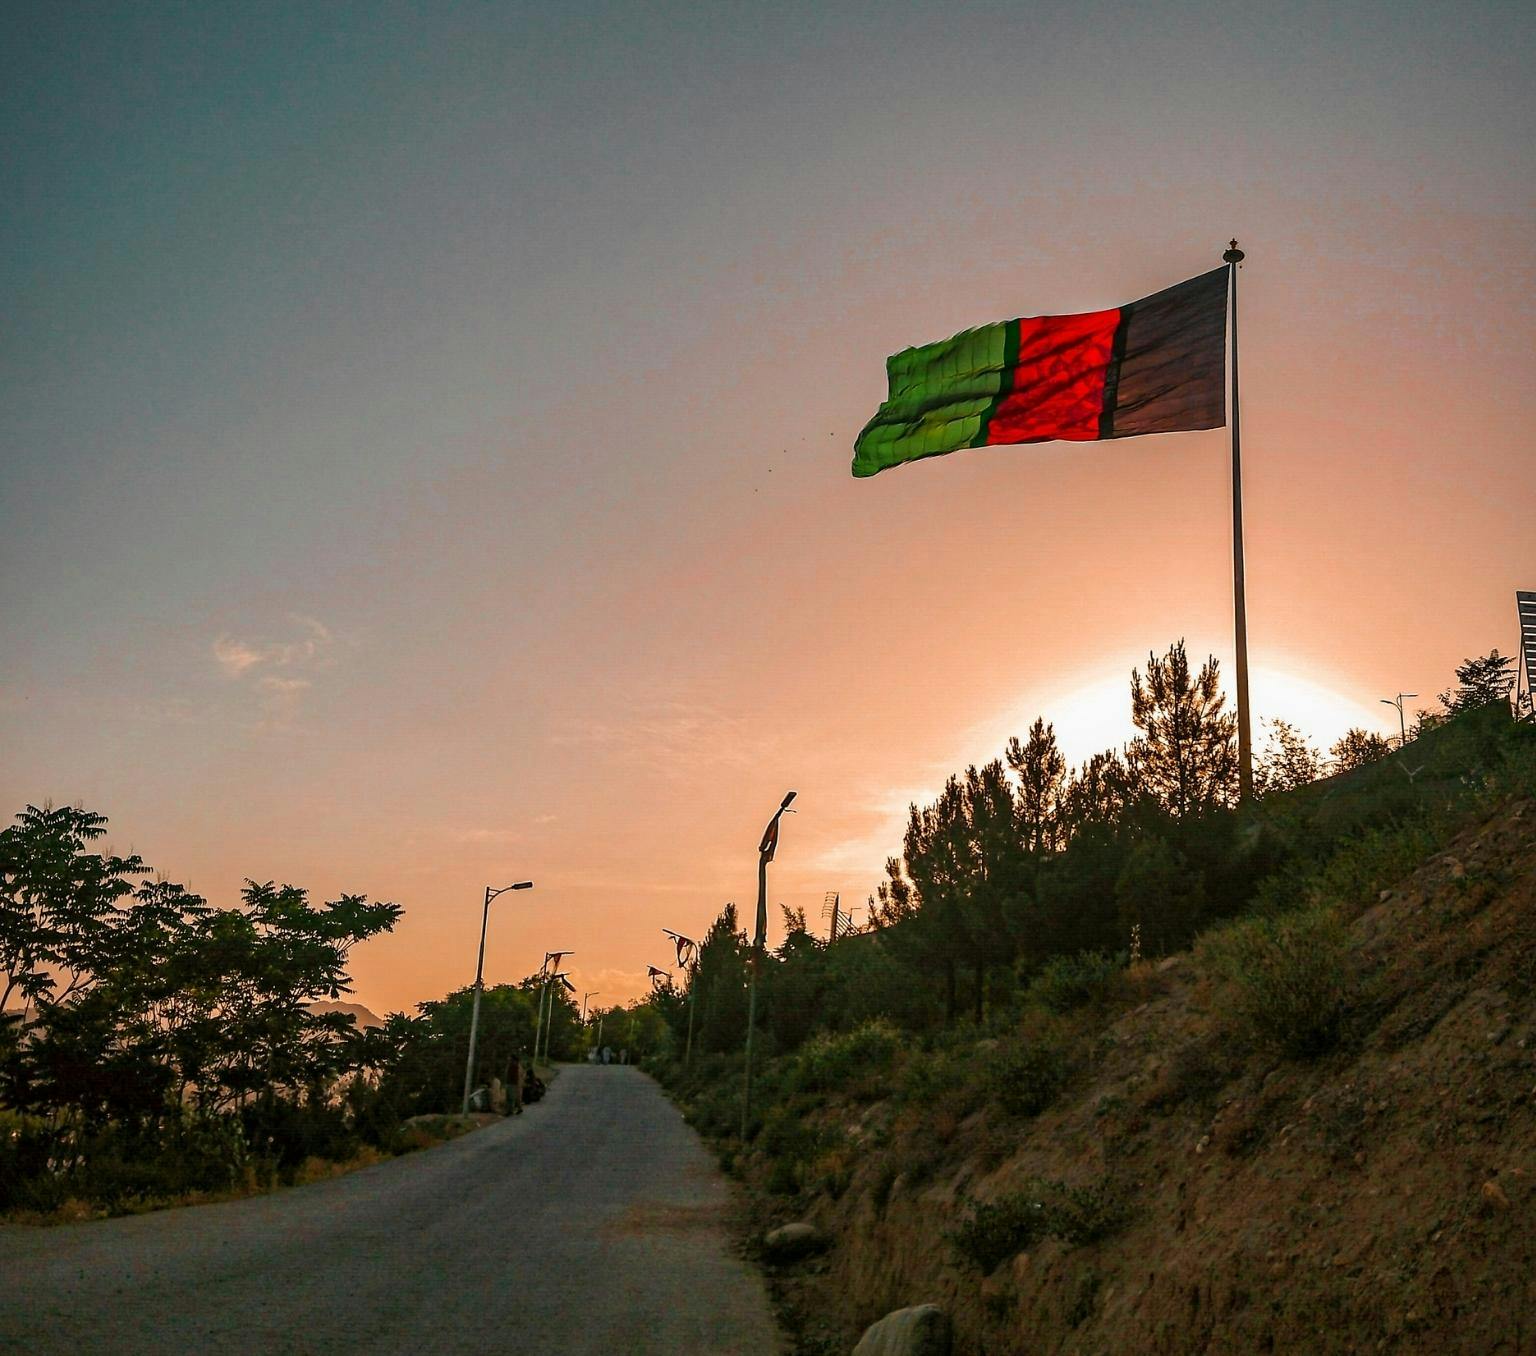 Afganistan flag with black, red and green vertical stipes and a yellow emblem is flying on a flag post on the side of a road. The road is surrounded by shrubs and the sun is setting in the background